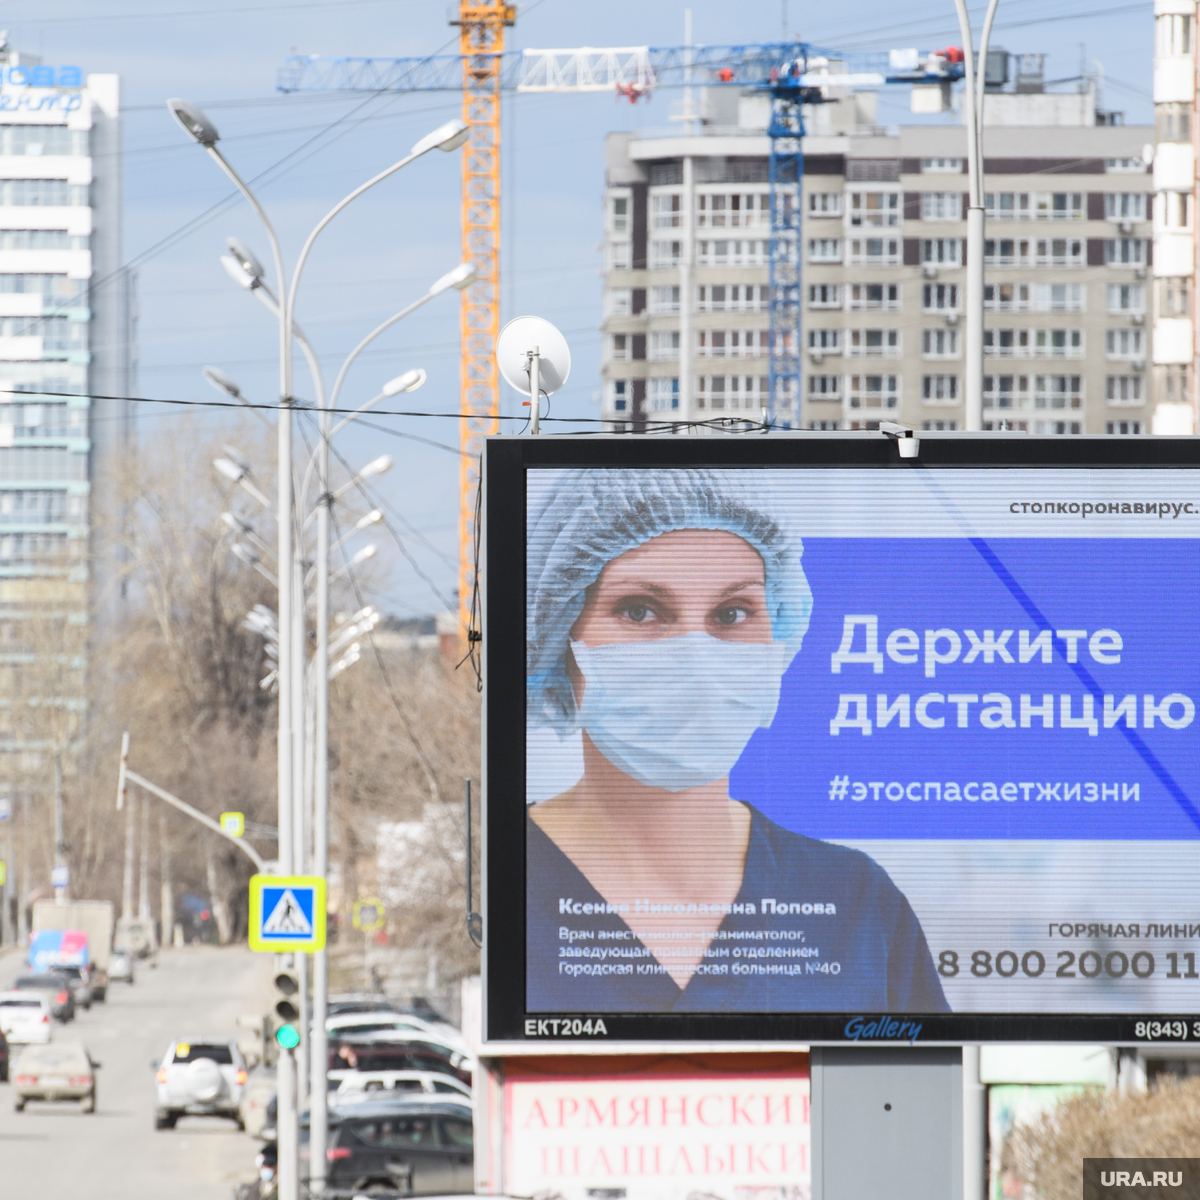 News Outdoor Russia